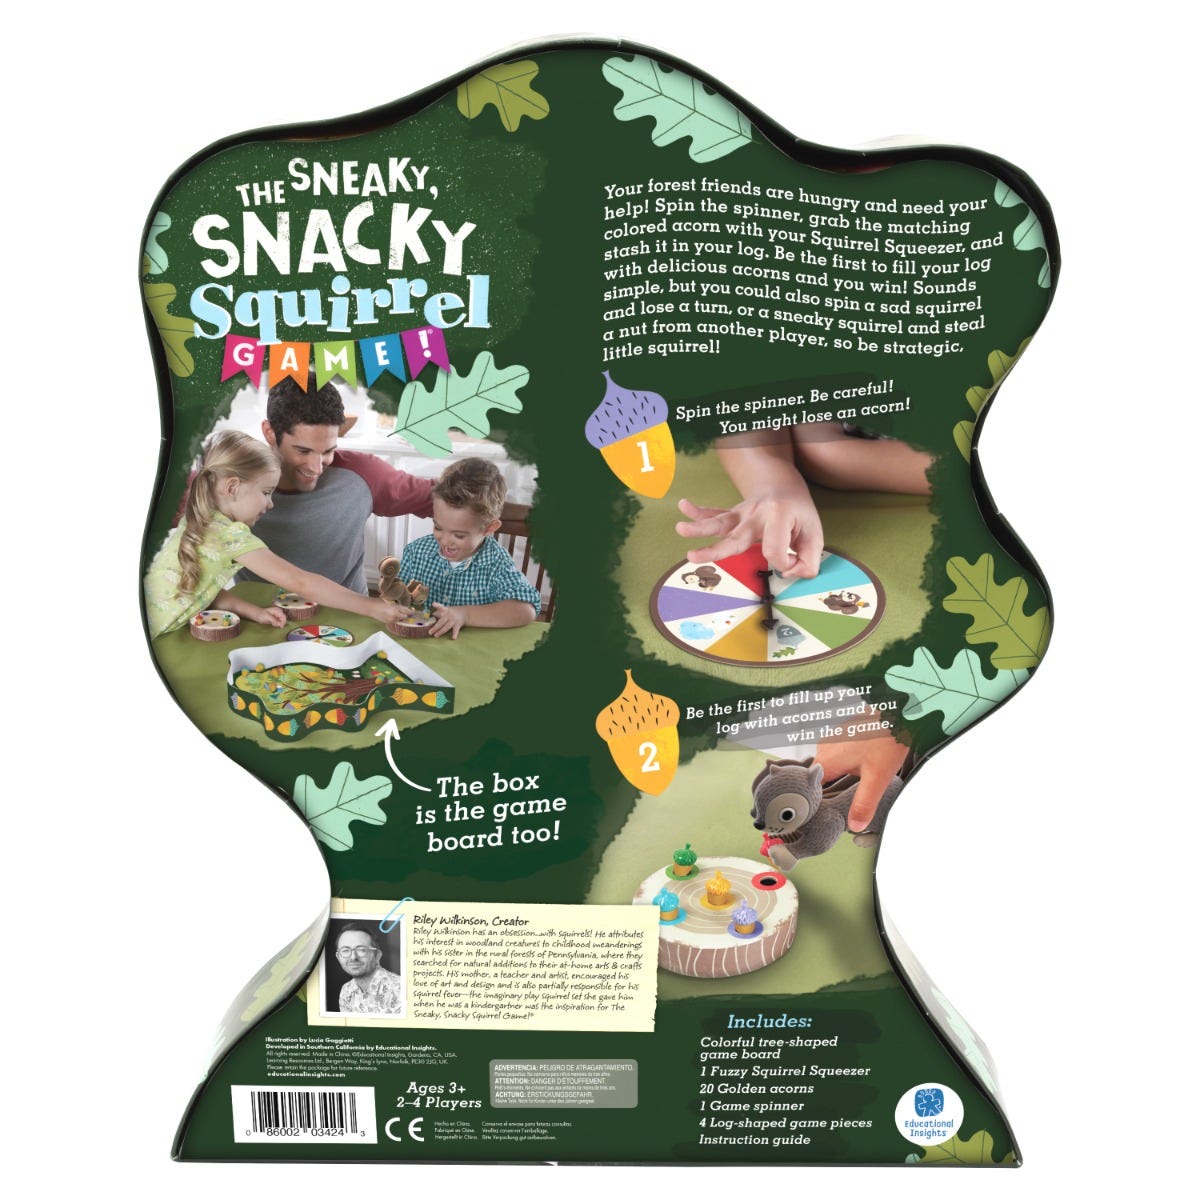 Sneaky Snacky, Squirrel Game Special Edition, Celebrate a decade of excitement and enjoyment with the Sneaky Snacky, Squirrel Game Special Edition! This best-selling preschool strategy game now comes in a collectible version, perfect for commemorating its 10th birthday.For years, the Sneaky Snacky Squirrel Game® has been a beloved addition to family game nights, captivating preschoolers while helping them develop important skills such as counting, colour-matching, and fine motor skills.This special edition 